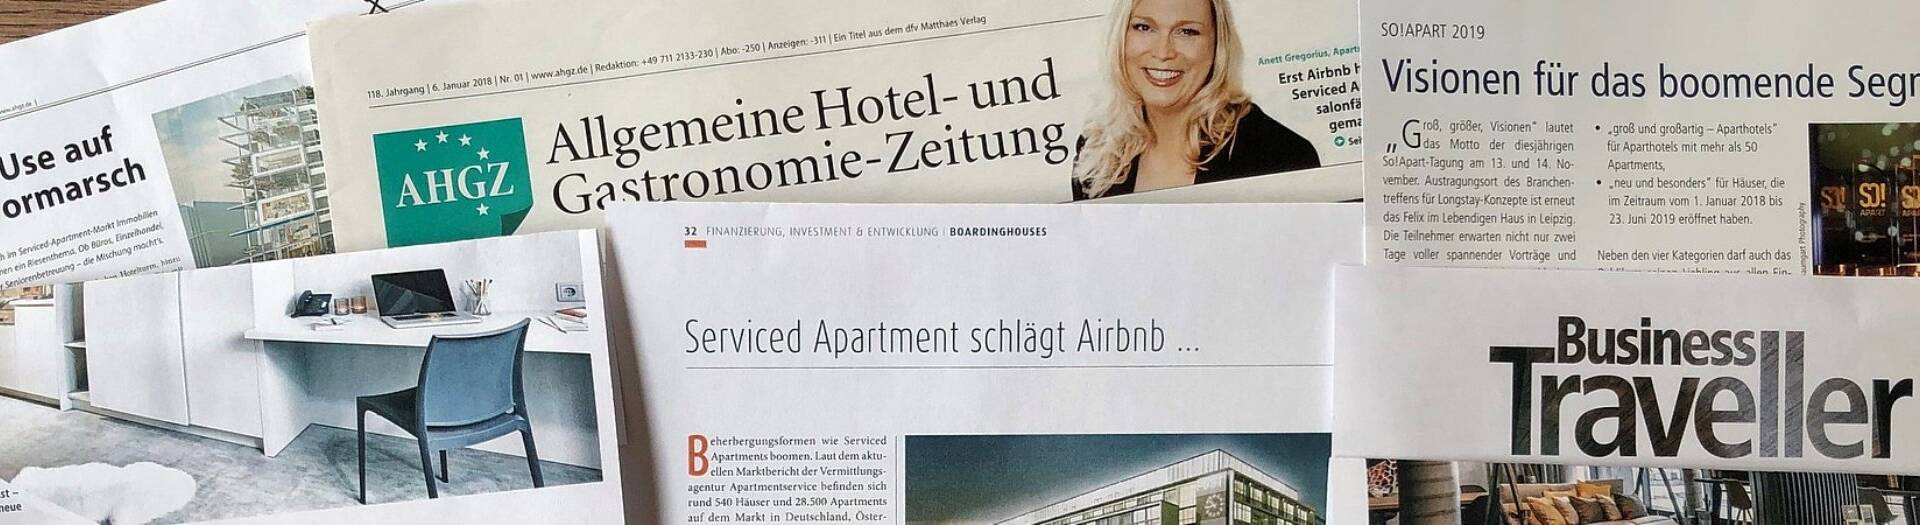 News clippings about the topic of serviced apartments